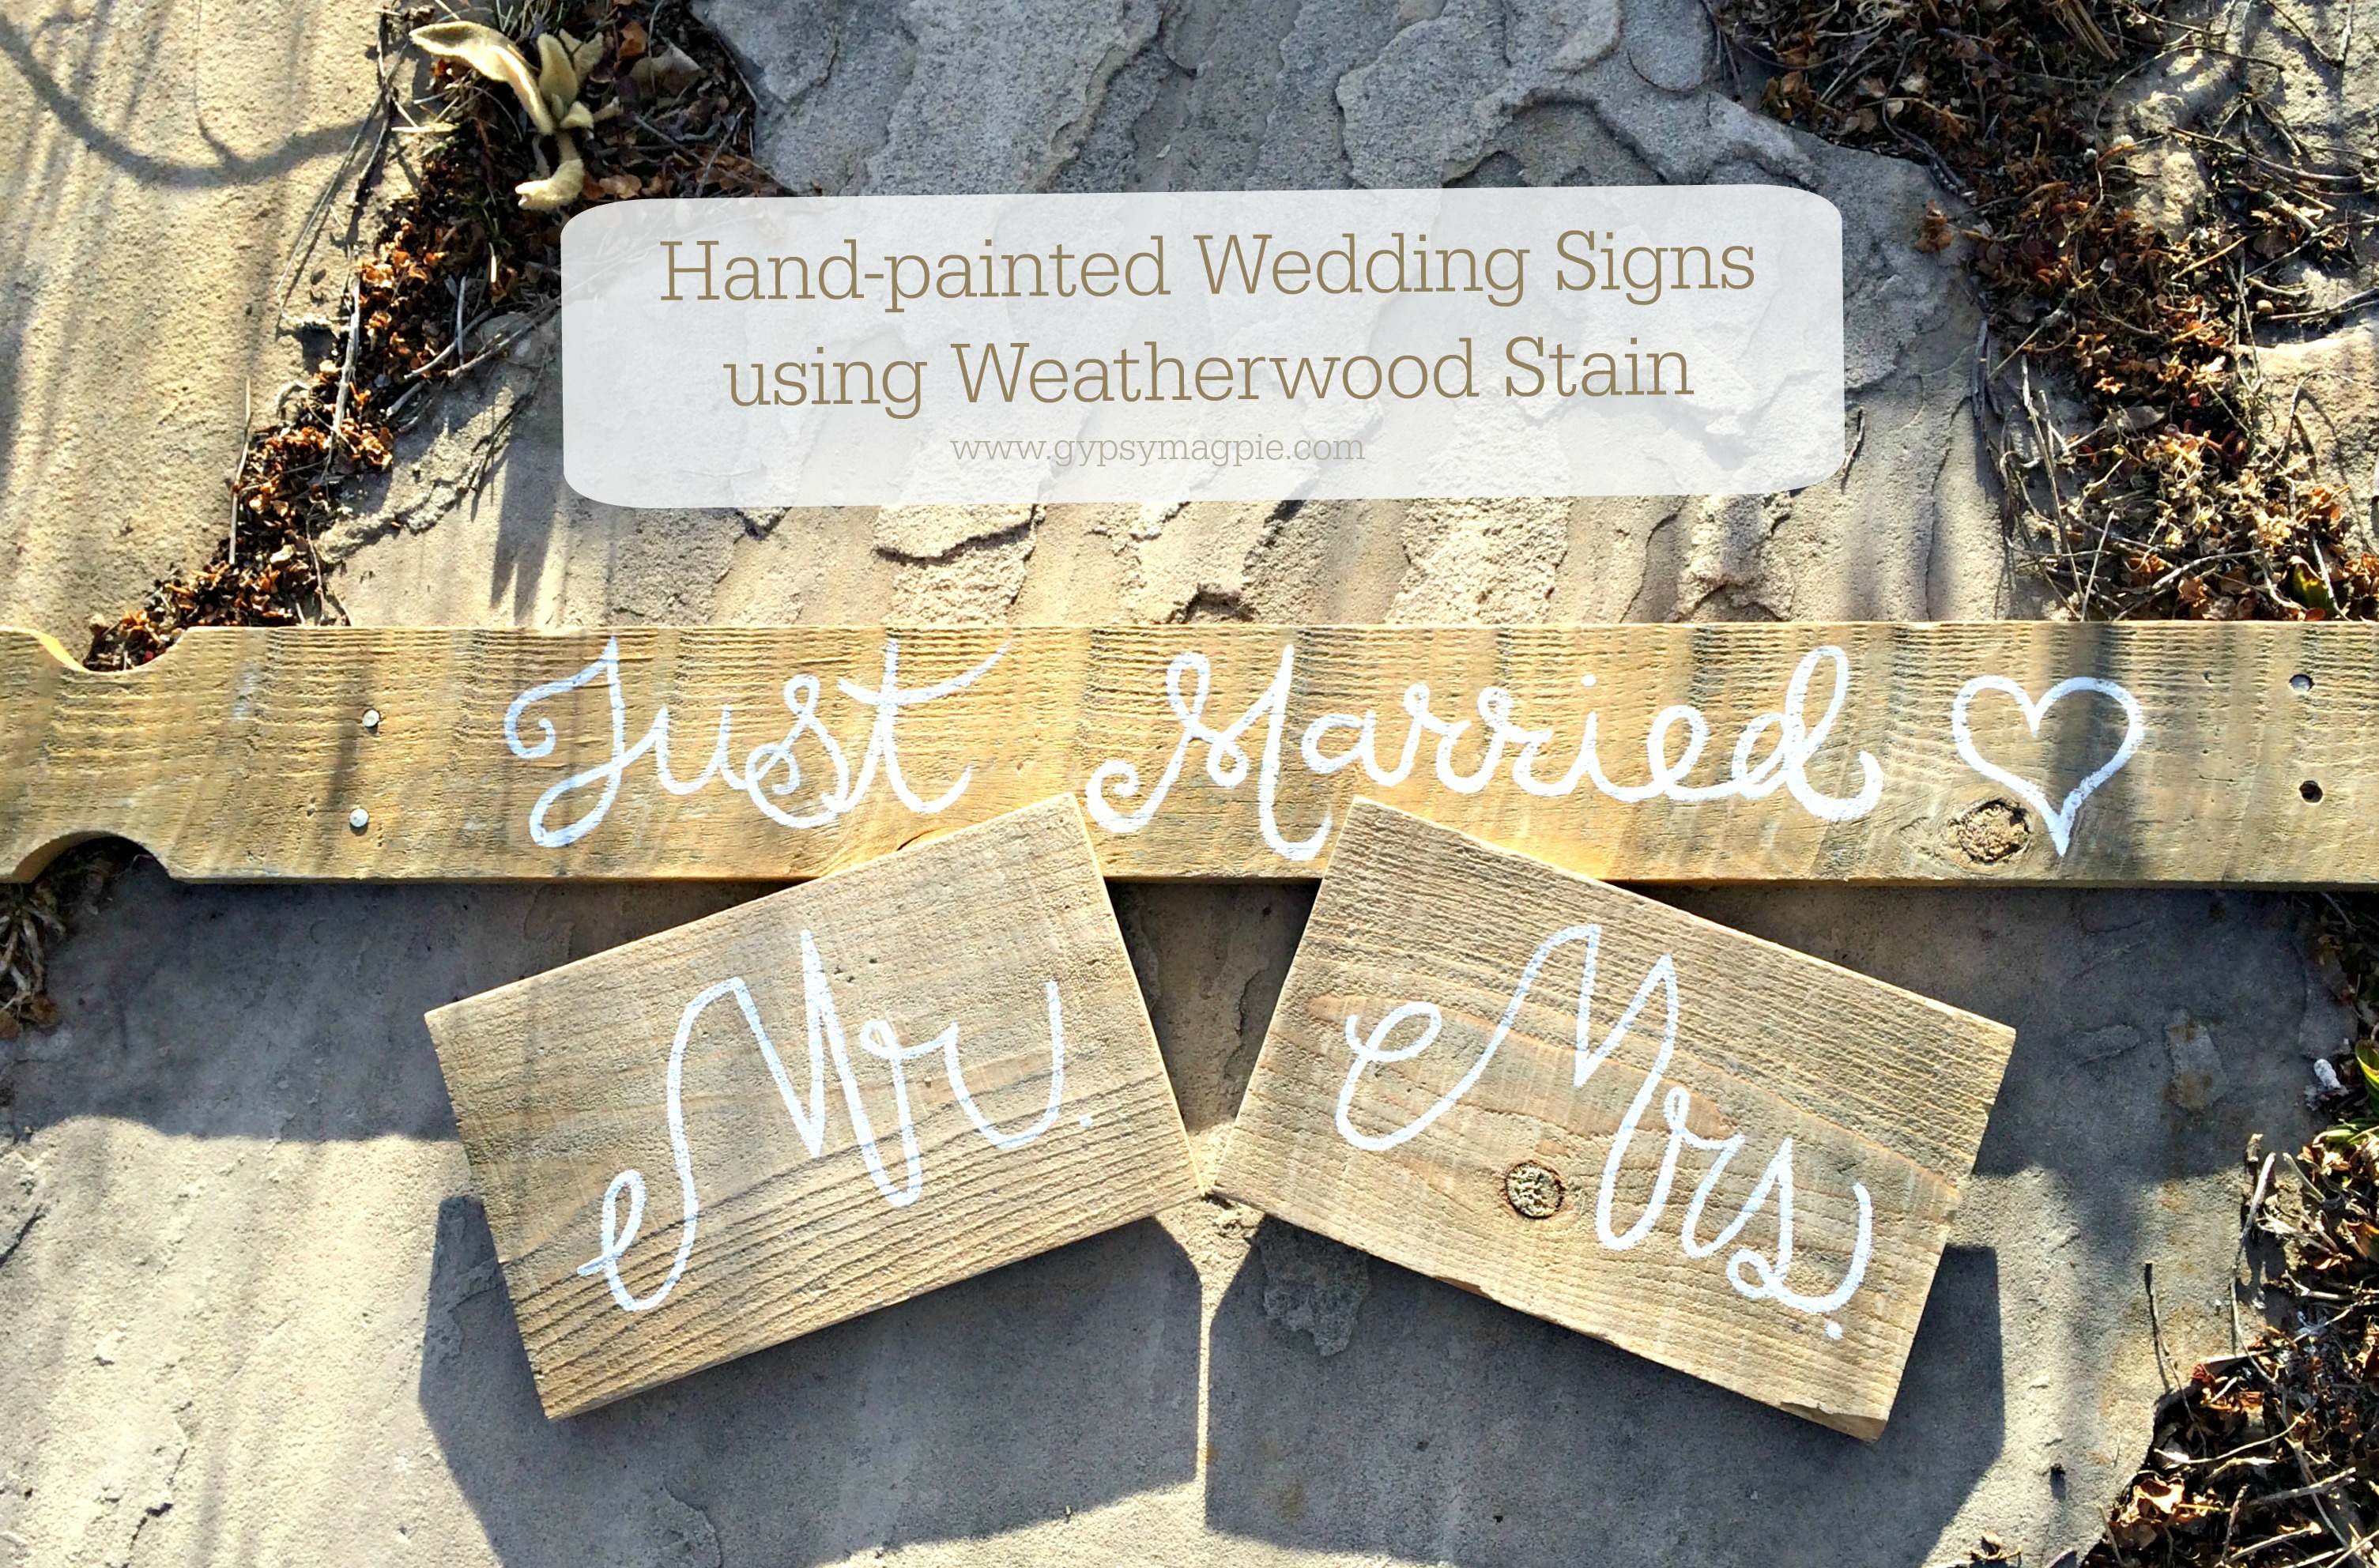 Hand-painted Wedding Signs using Weatherwood Stain for that Old Wood Look {Gypsy Magpie}